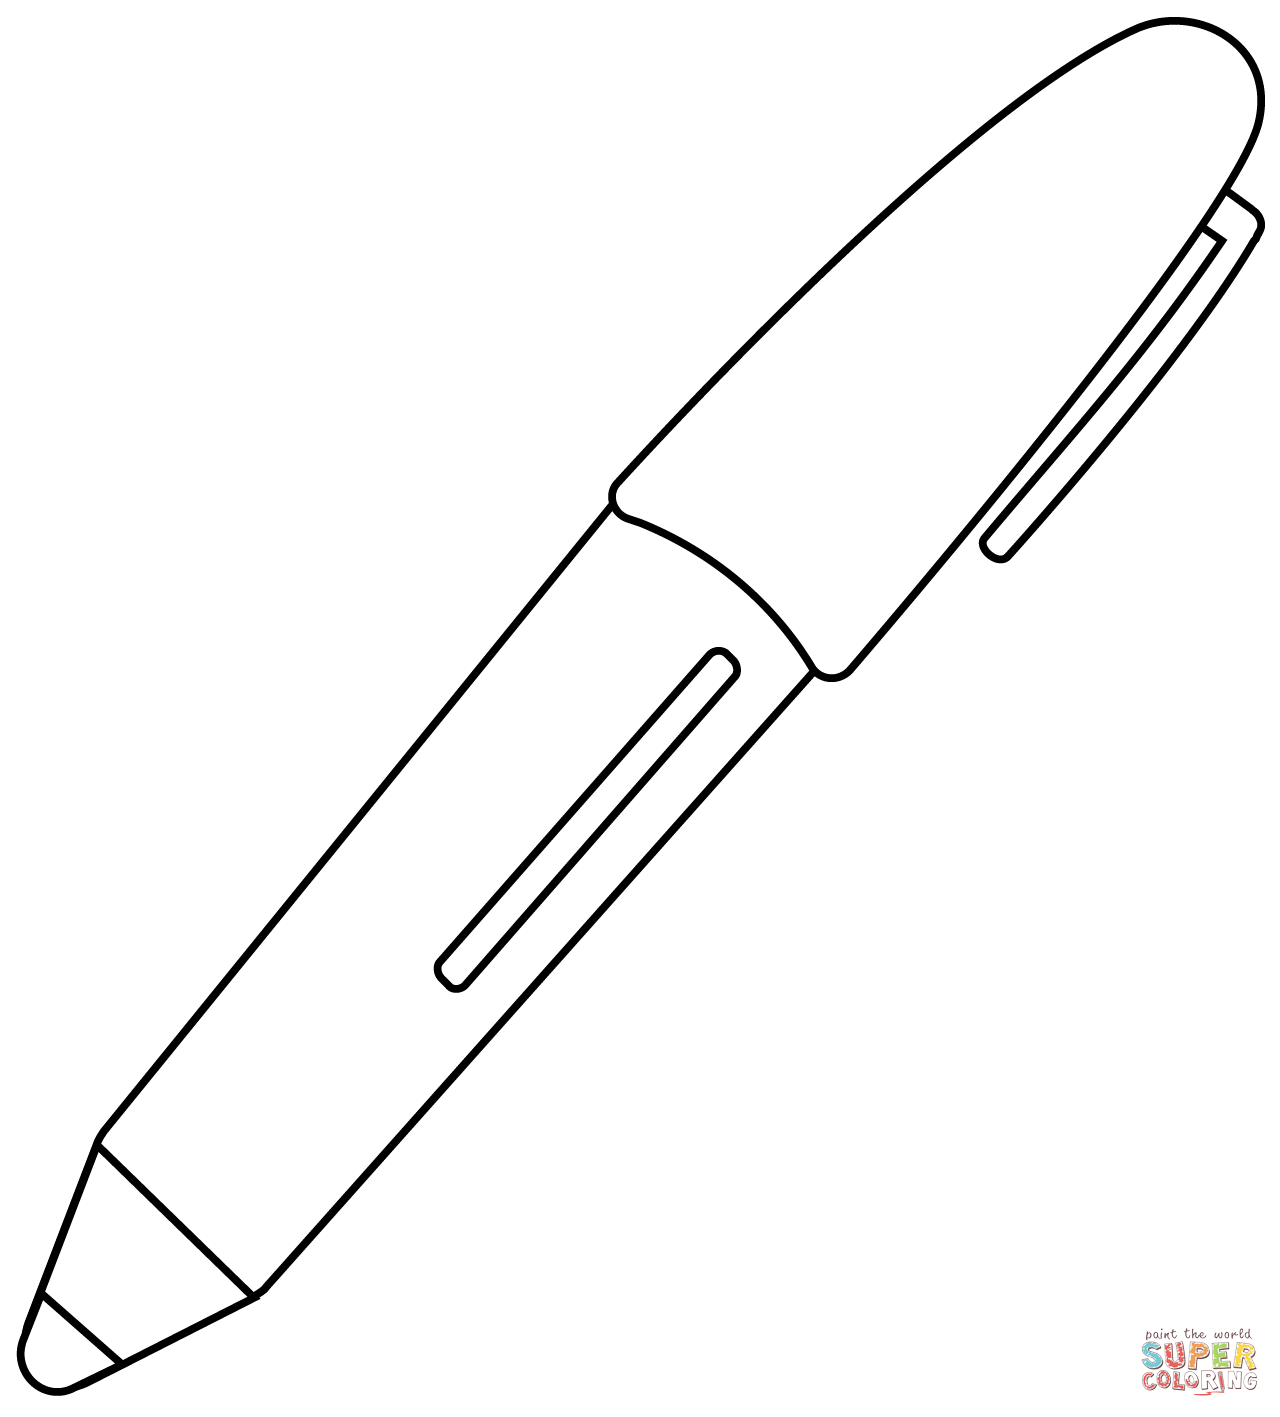 Pen emoji coloring page free printable coloring pages